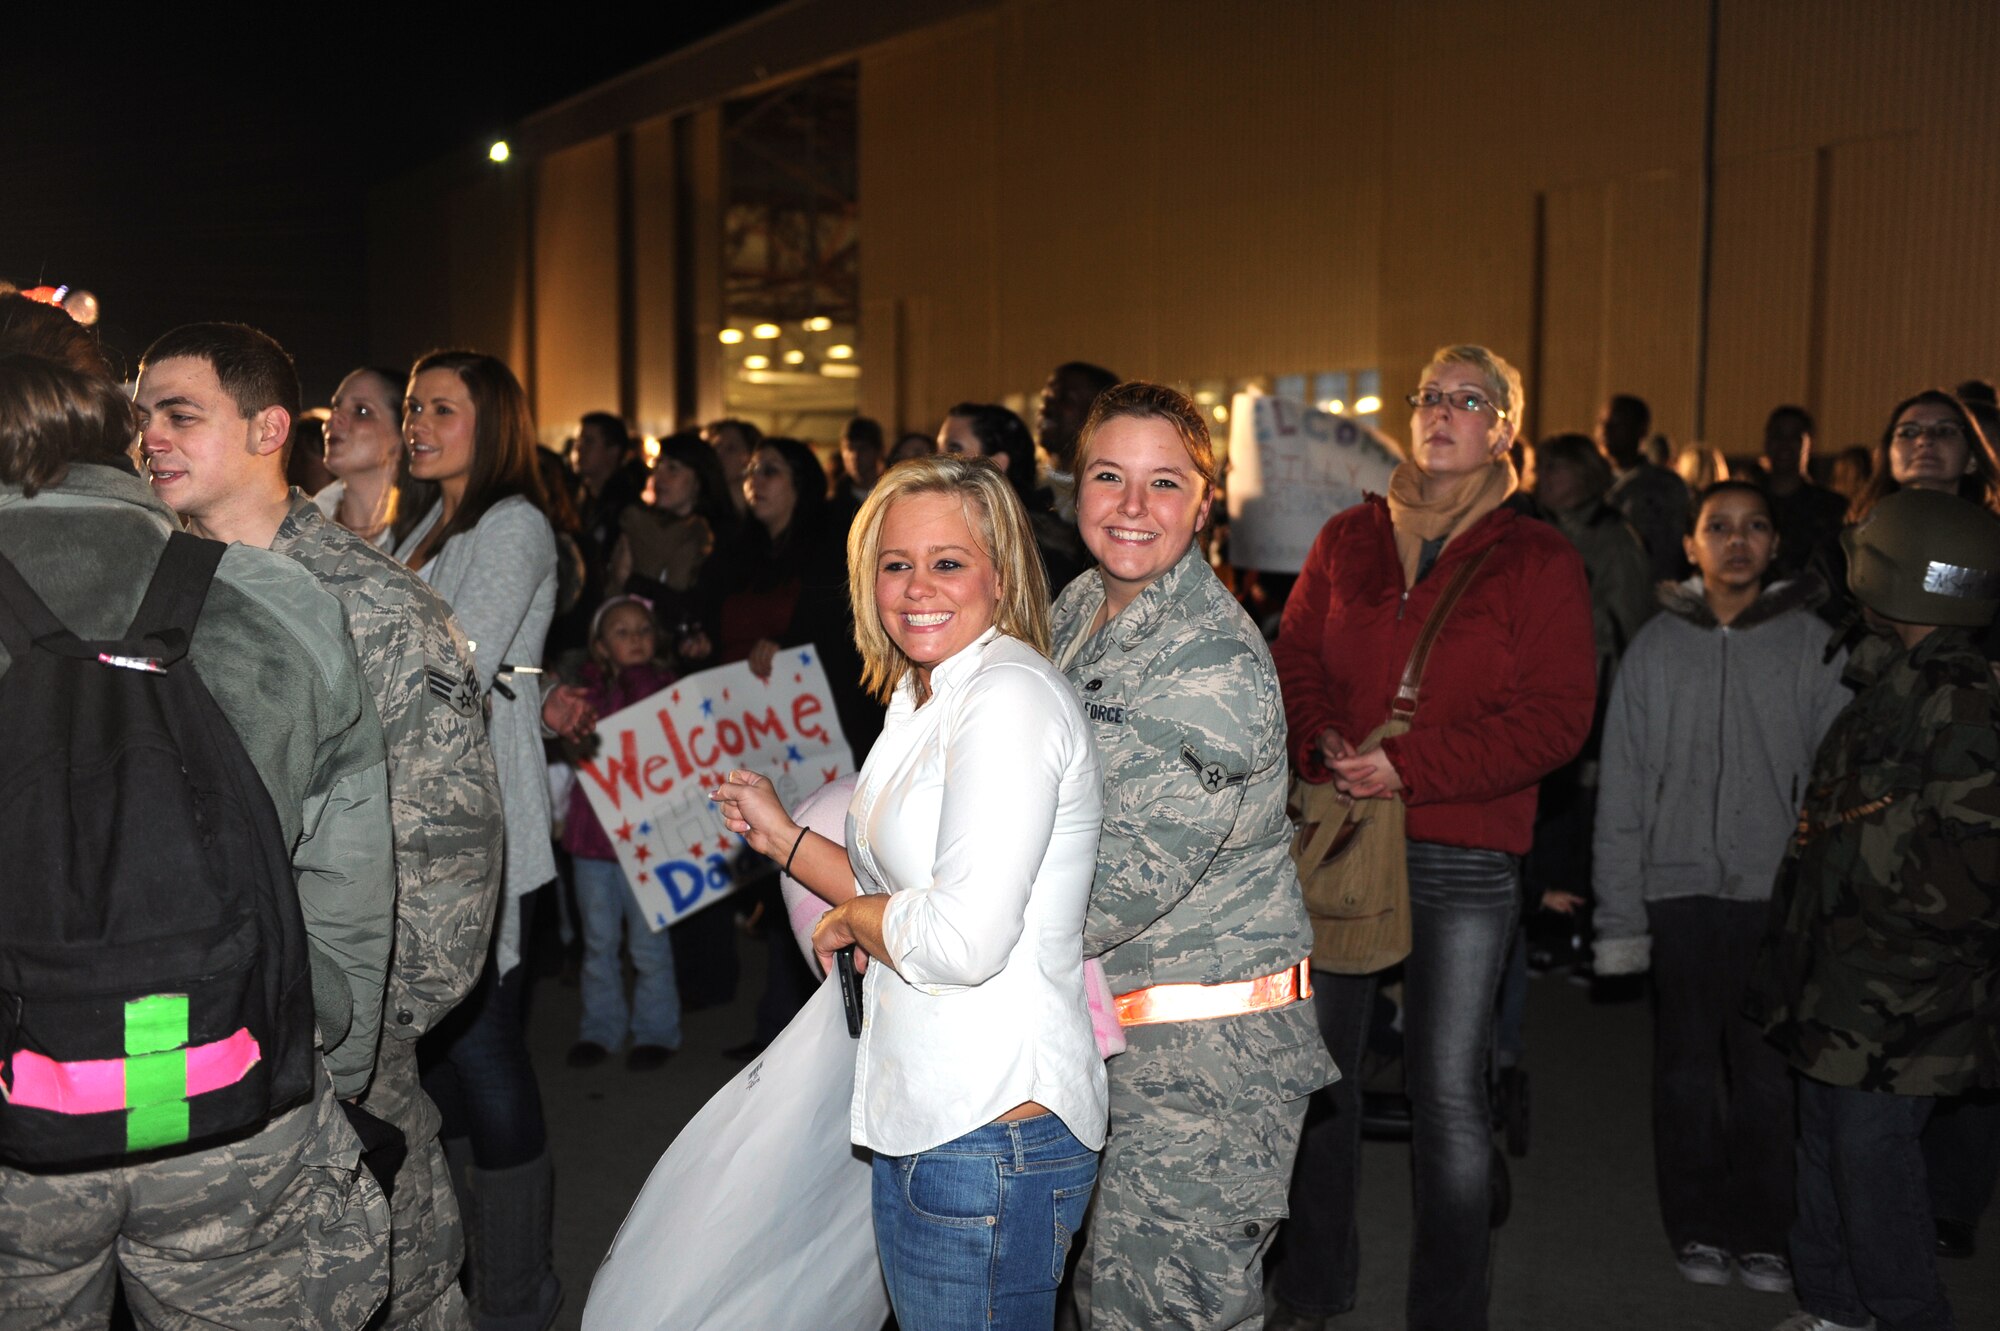 SHAW AIR FORCE BASE, S.C. -- An excited crowd greeted hundreds of Airmen assigned to the 20th Fighter Wing as they returned this week after a four-month deployment in support of NATO efforts in Afghanistan.  (U.S. Air Force Photo/Tech. Sgt. Louis Rivers)